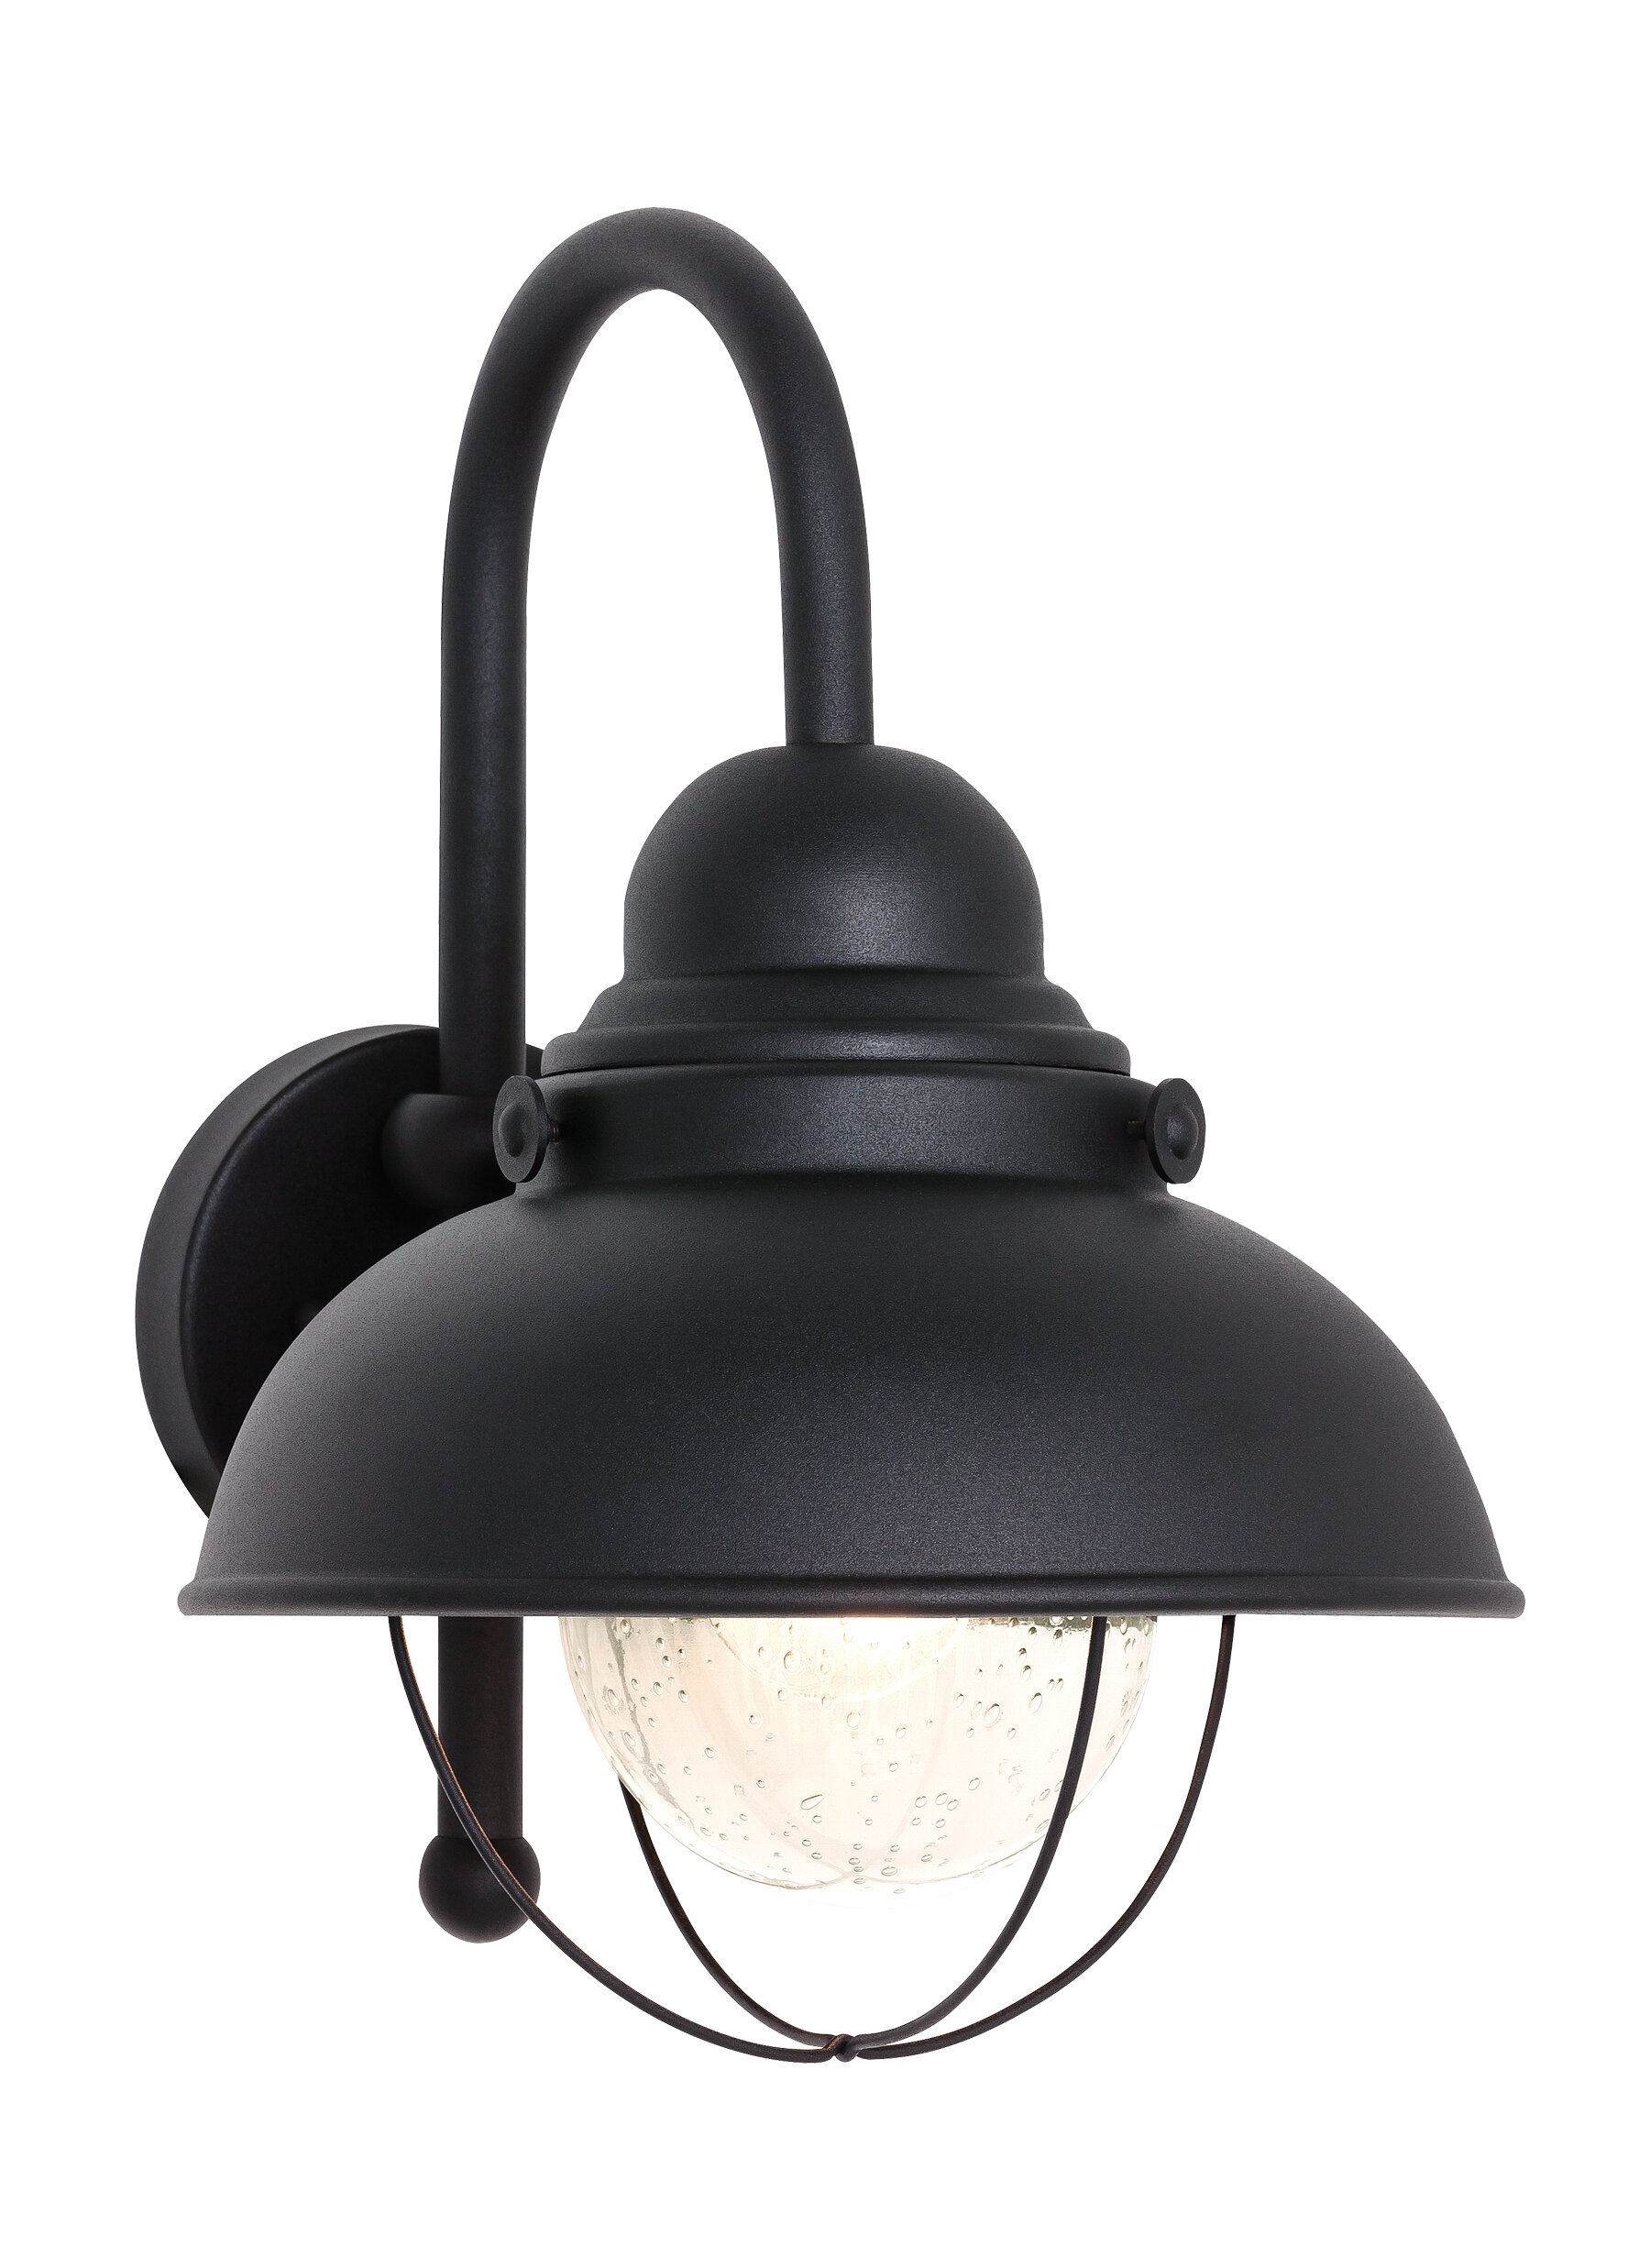 Details about   Outdoor Wall Lantern Sconce Light Black Seeded Glass Lighting Porch Patio Decor 